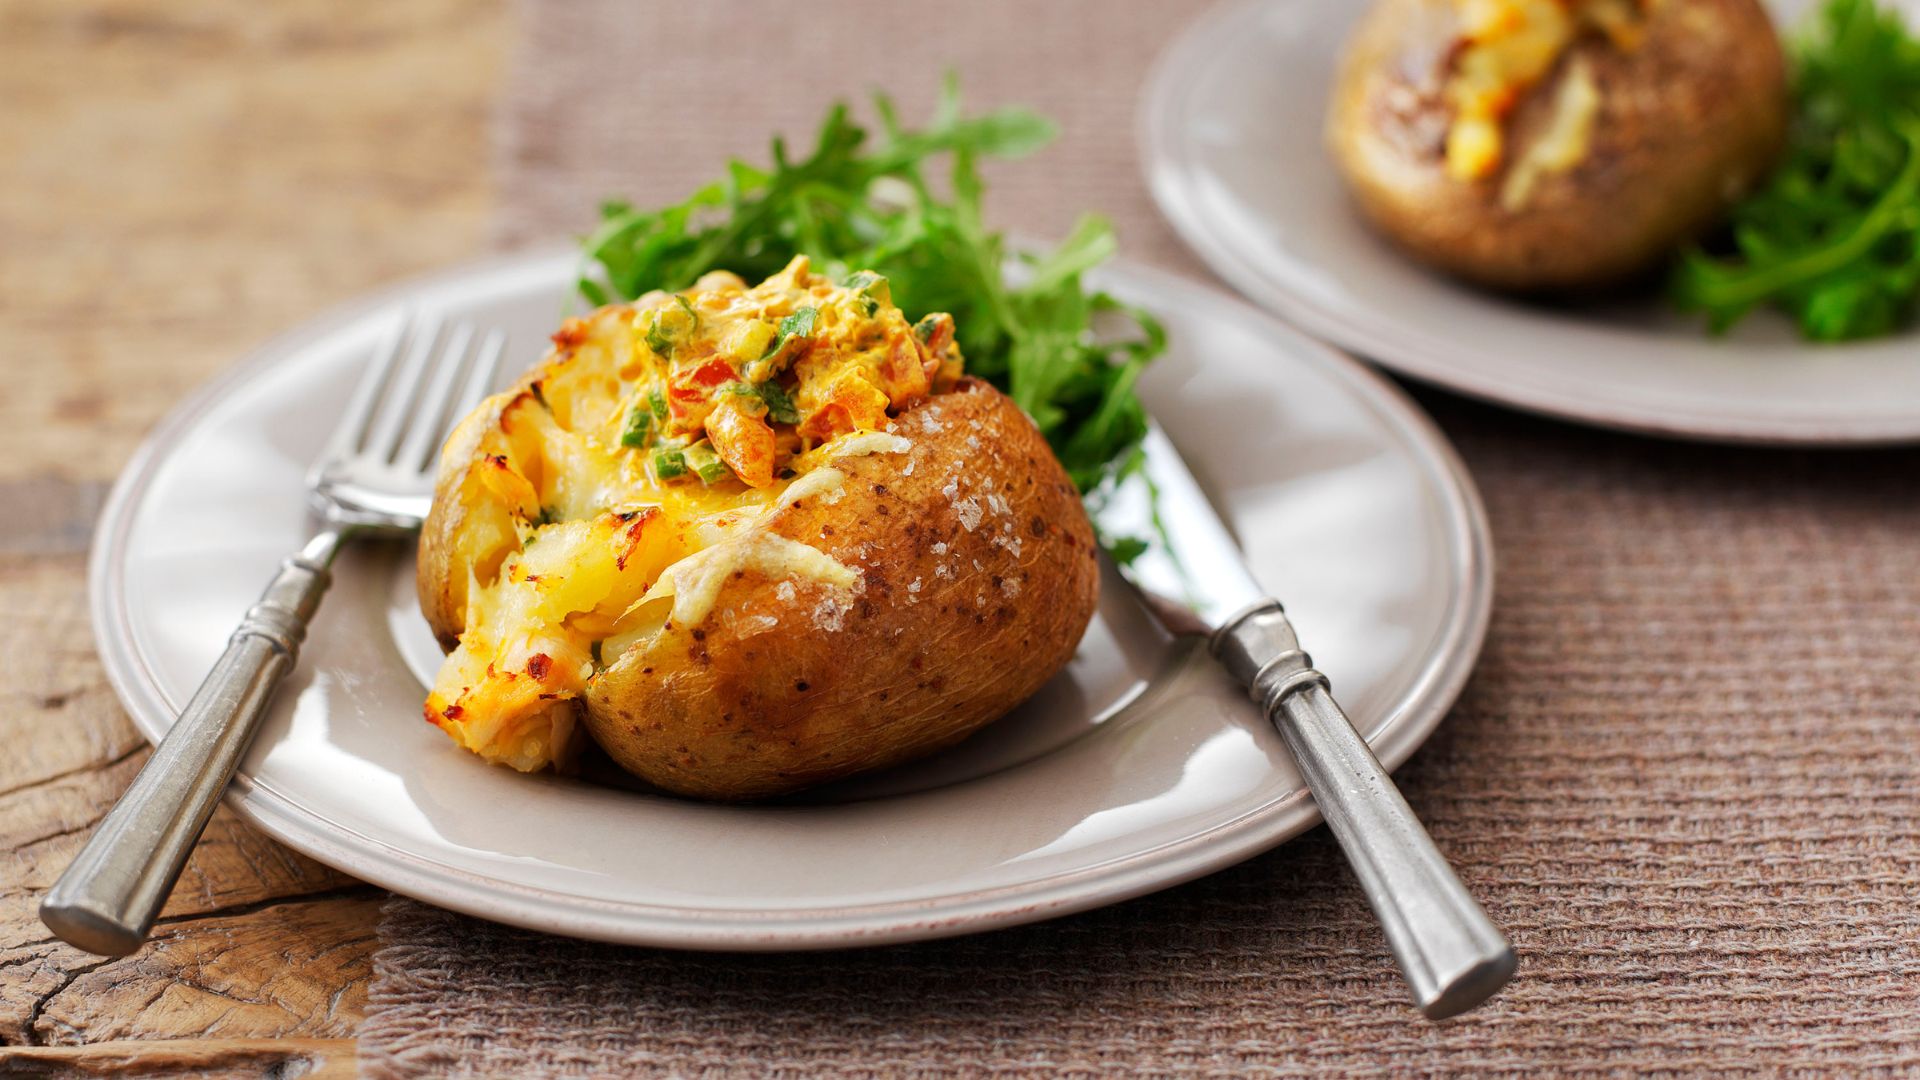 this image shows Baked Potatoes